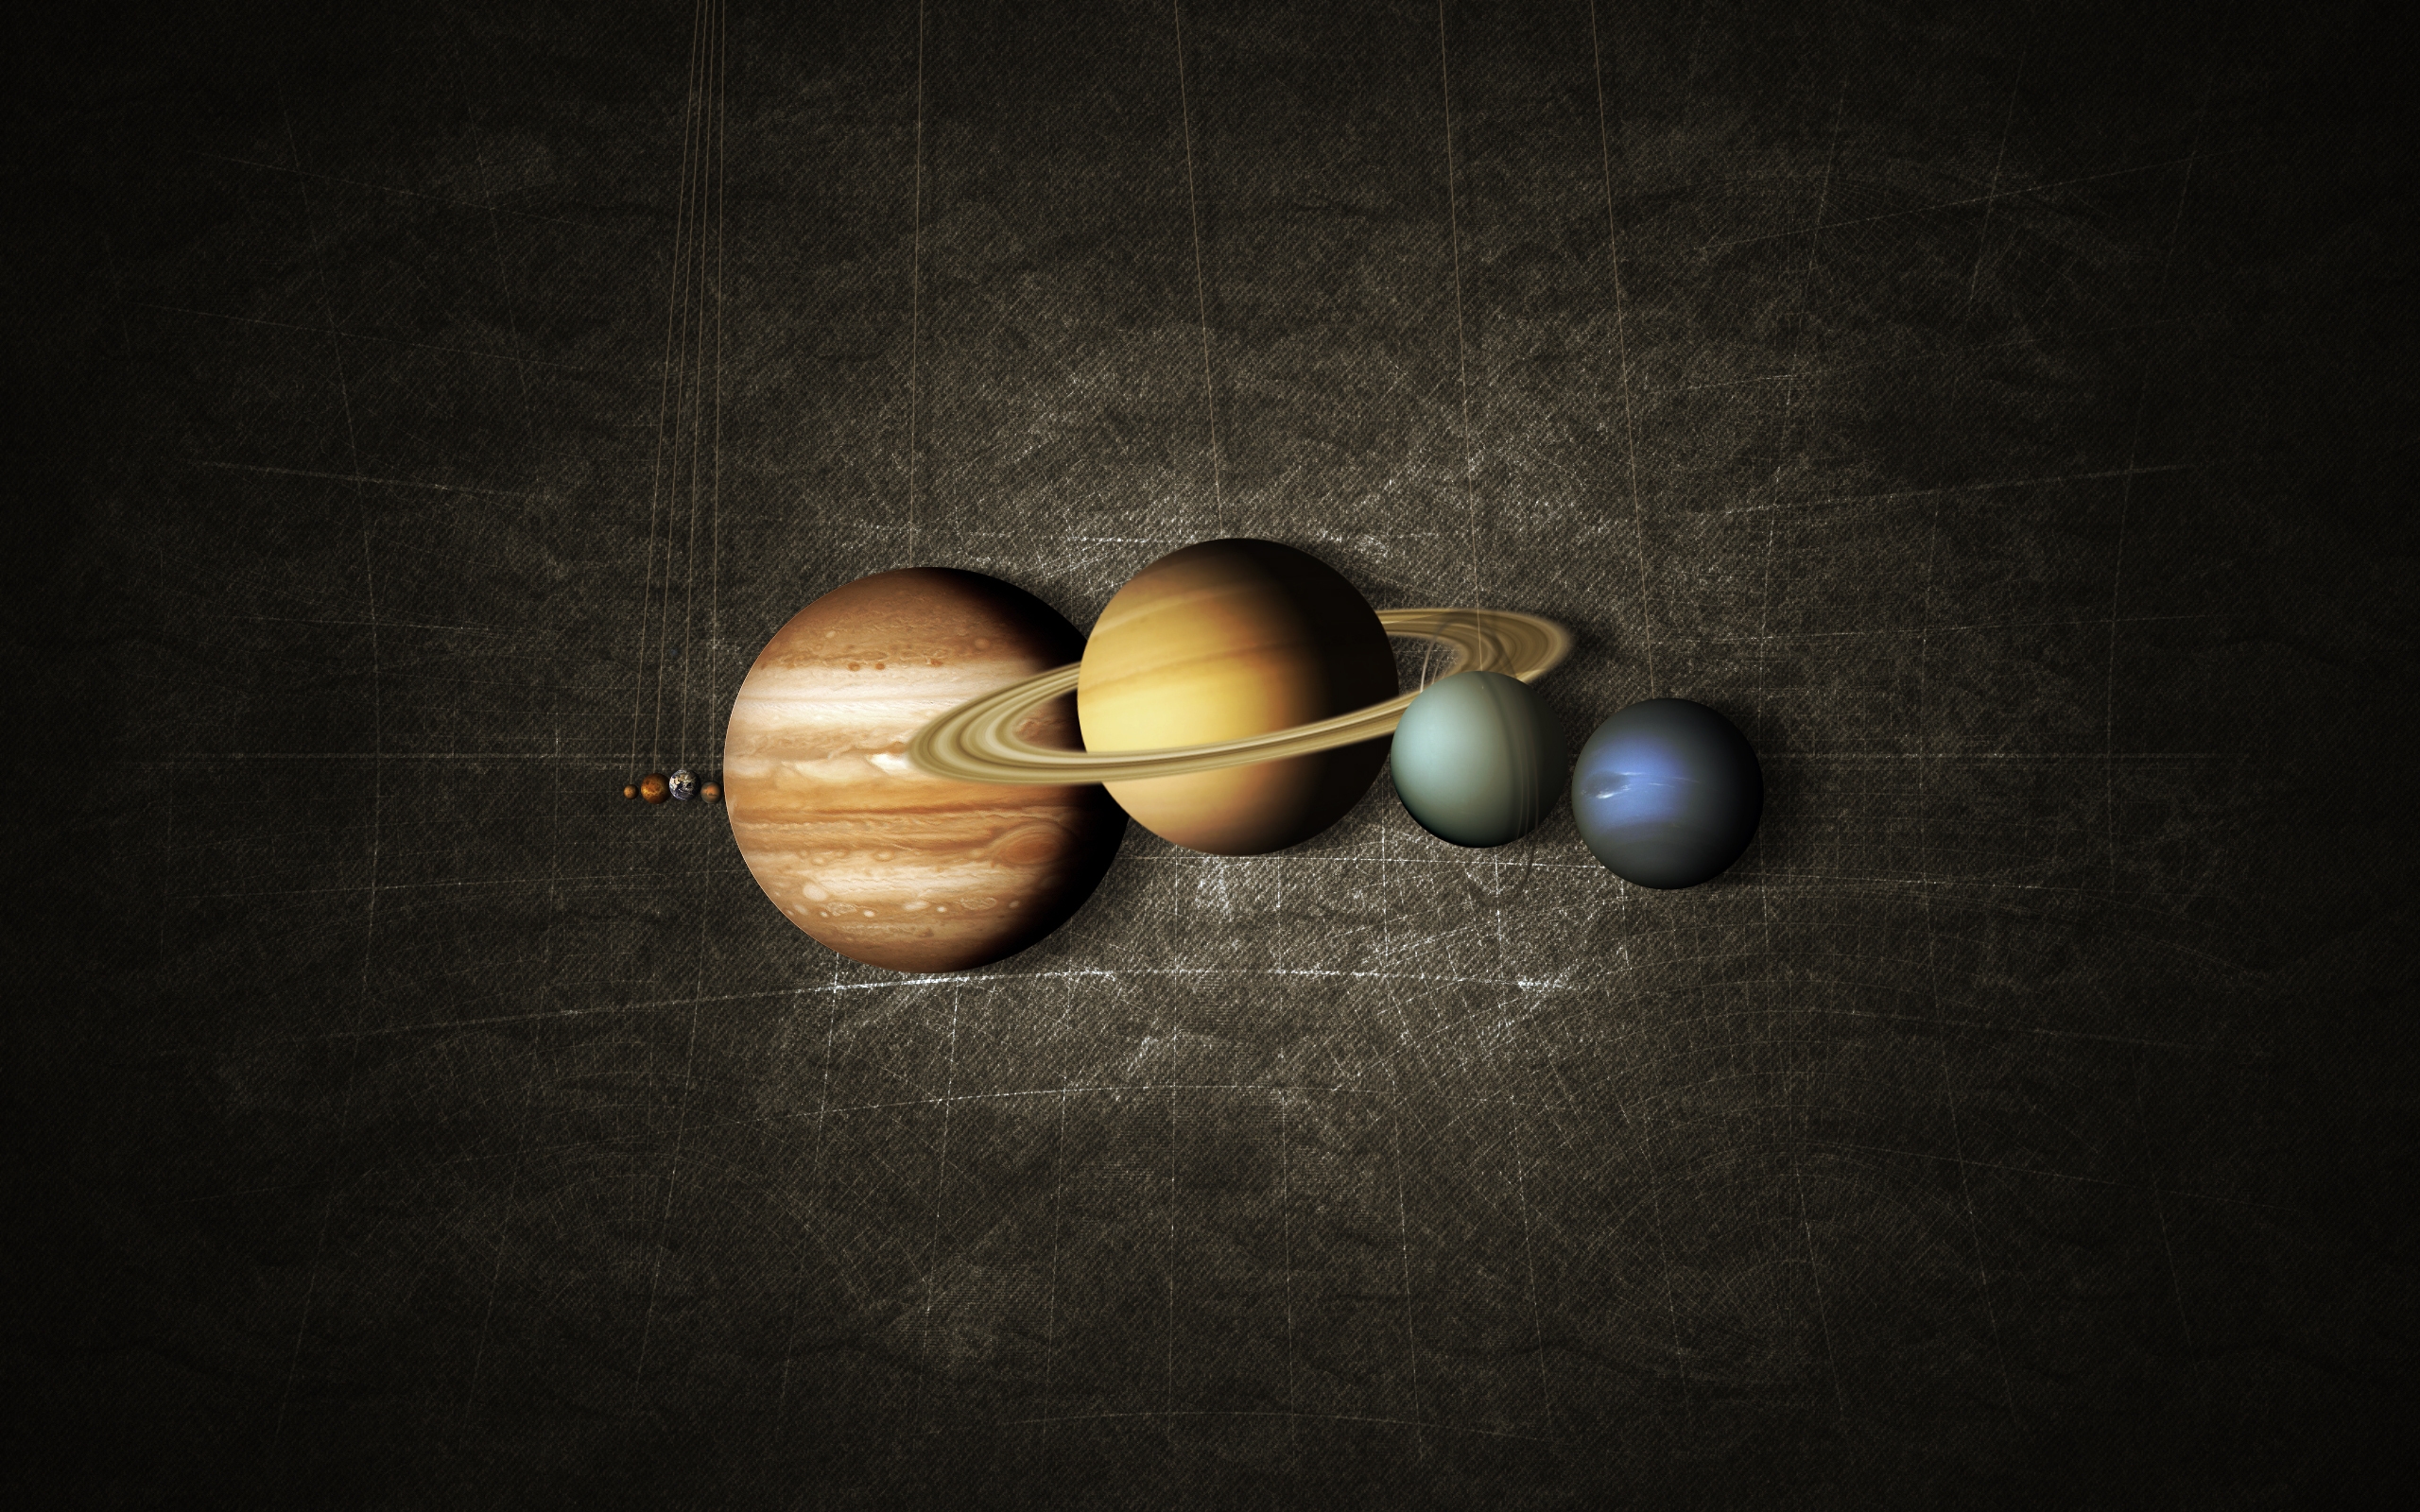 Planets Aligned for 2560 x 1600 widescreen resolution